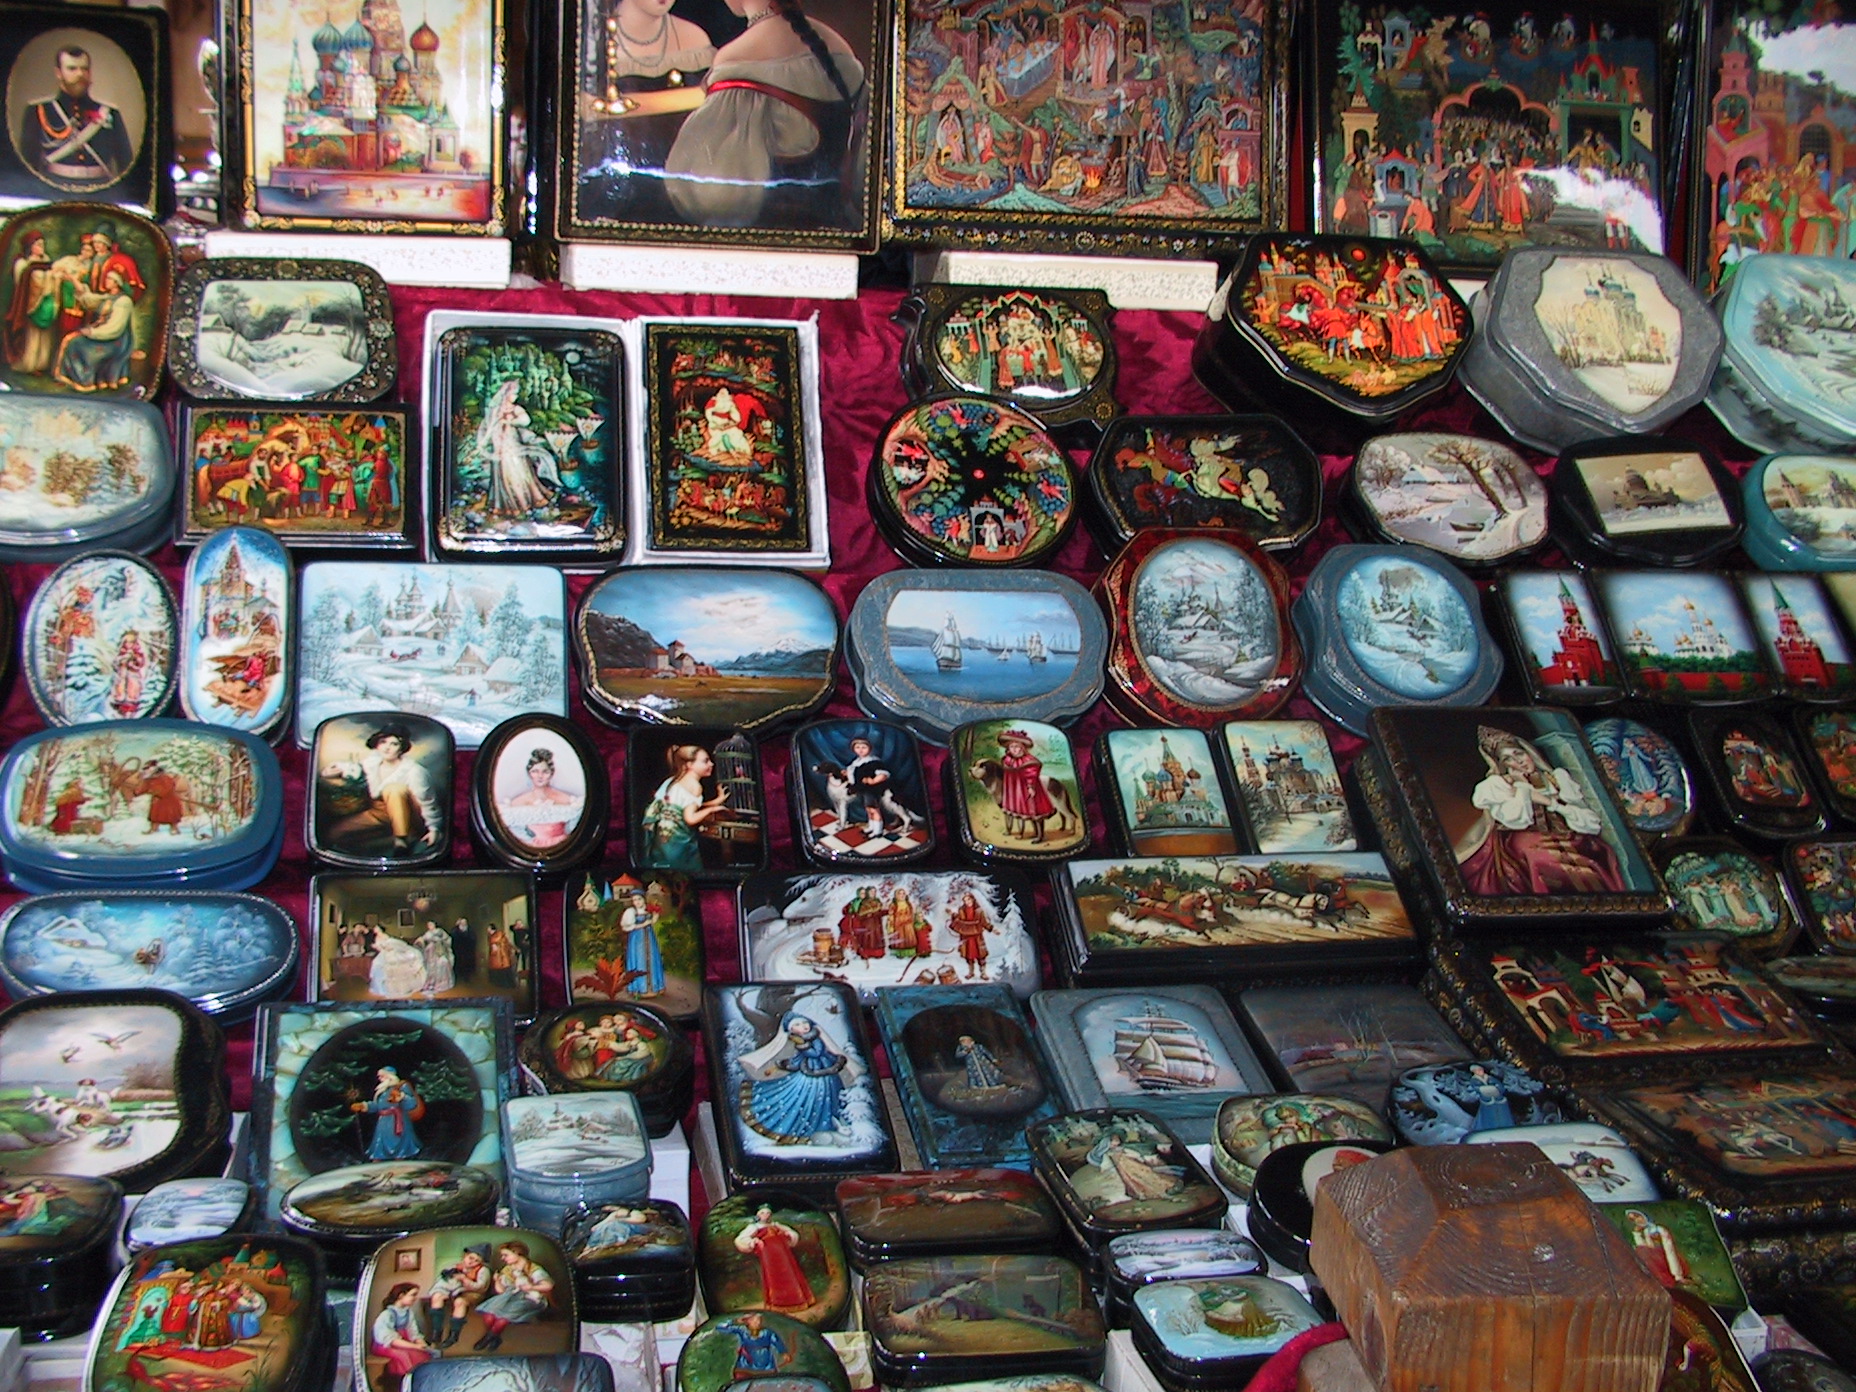 Vernisazh.. Moscow's top flea market where tourists could find all sorts of antiques and craftworks on display and for sale